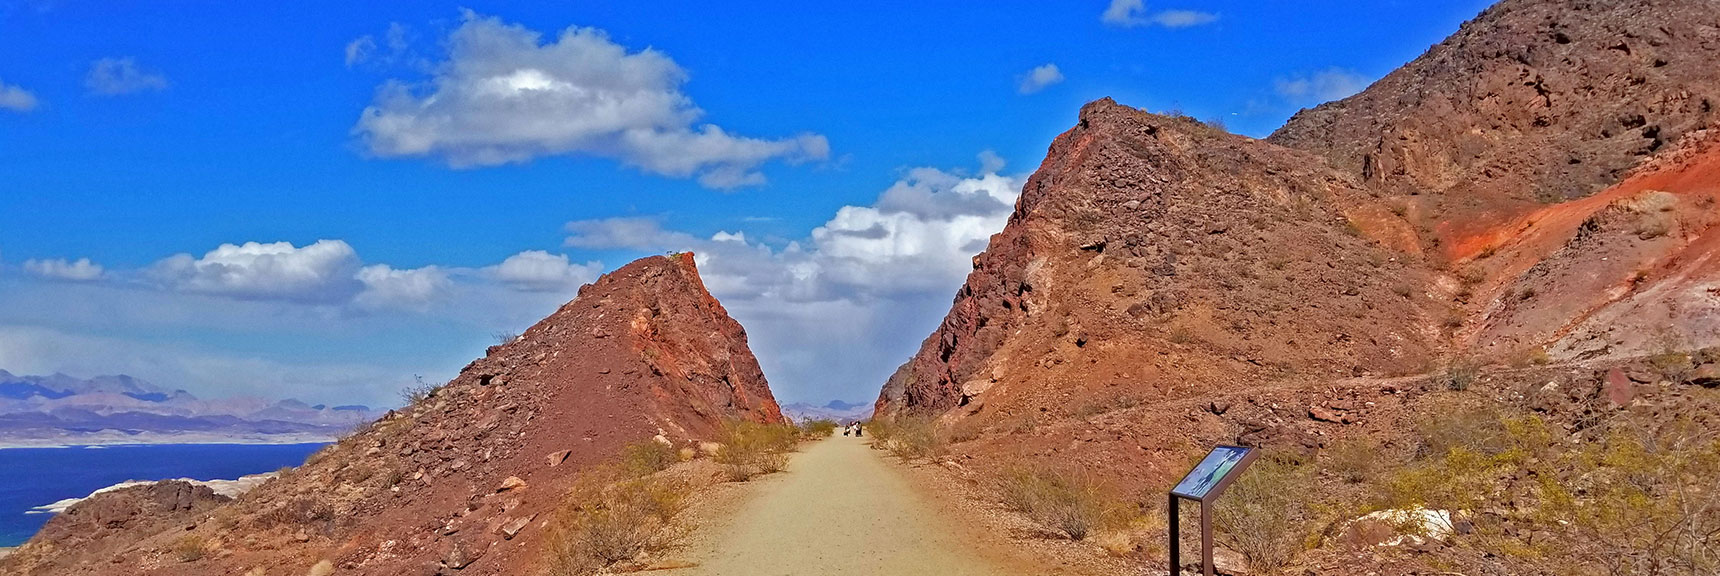 The Railroad Cuts Through the First Hill | Historic Railroad Trail | Lake Mead National Recreation Area, Nevada